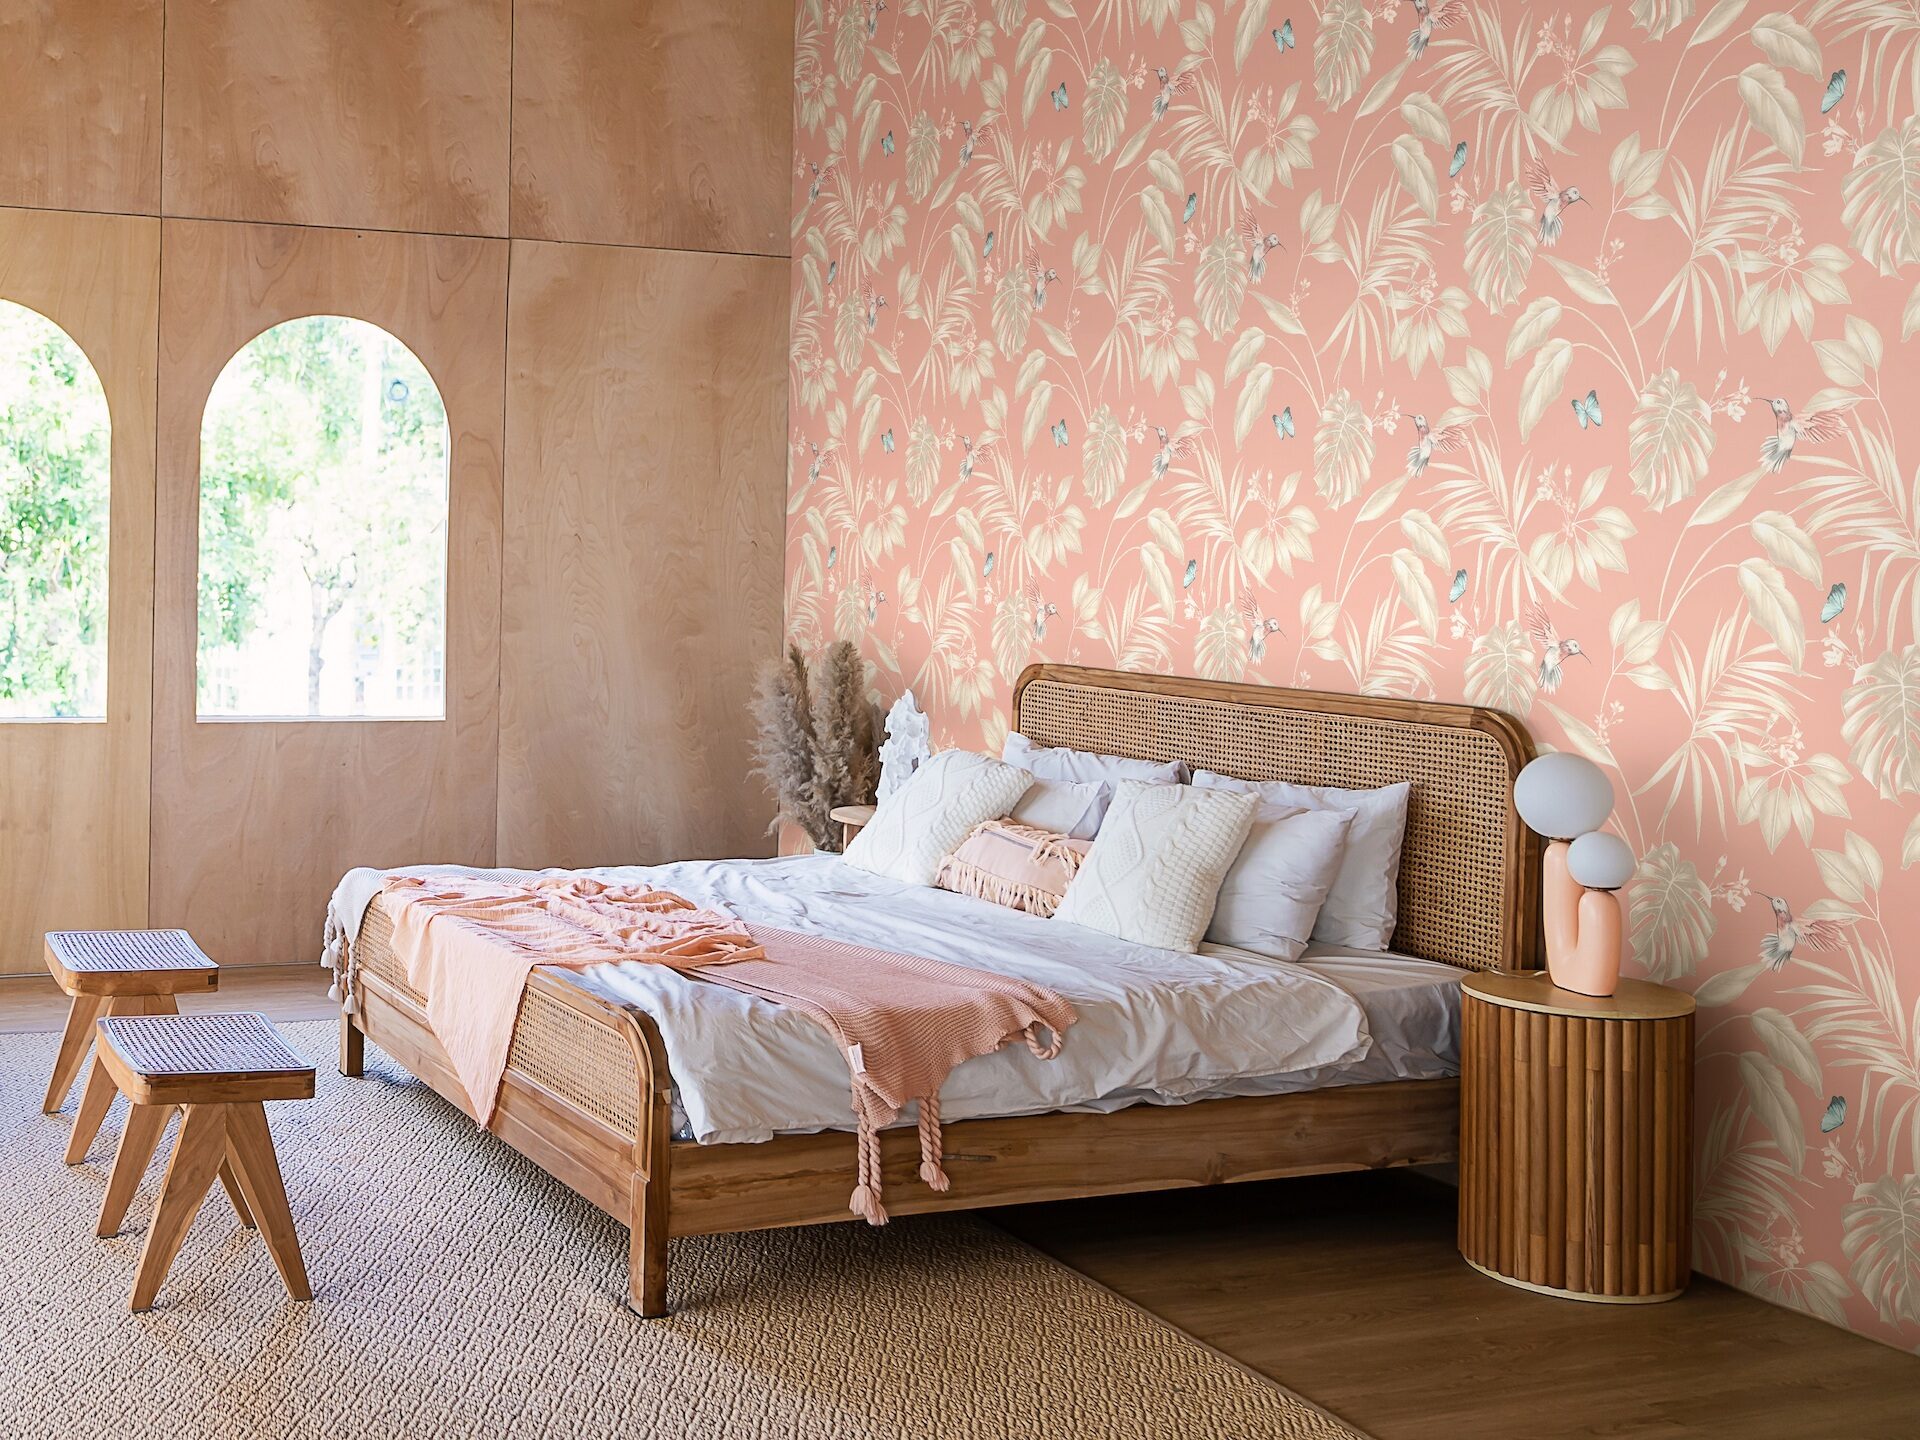 Ohpopsi launches Laid Bare wallpaper collection